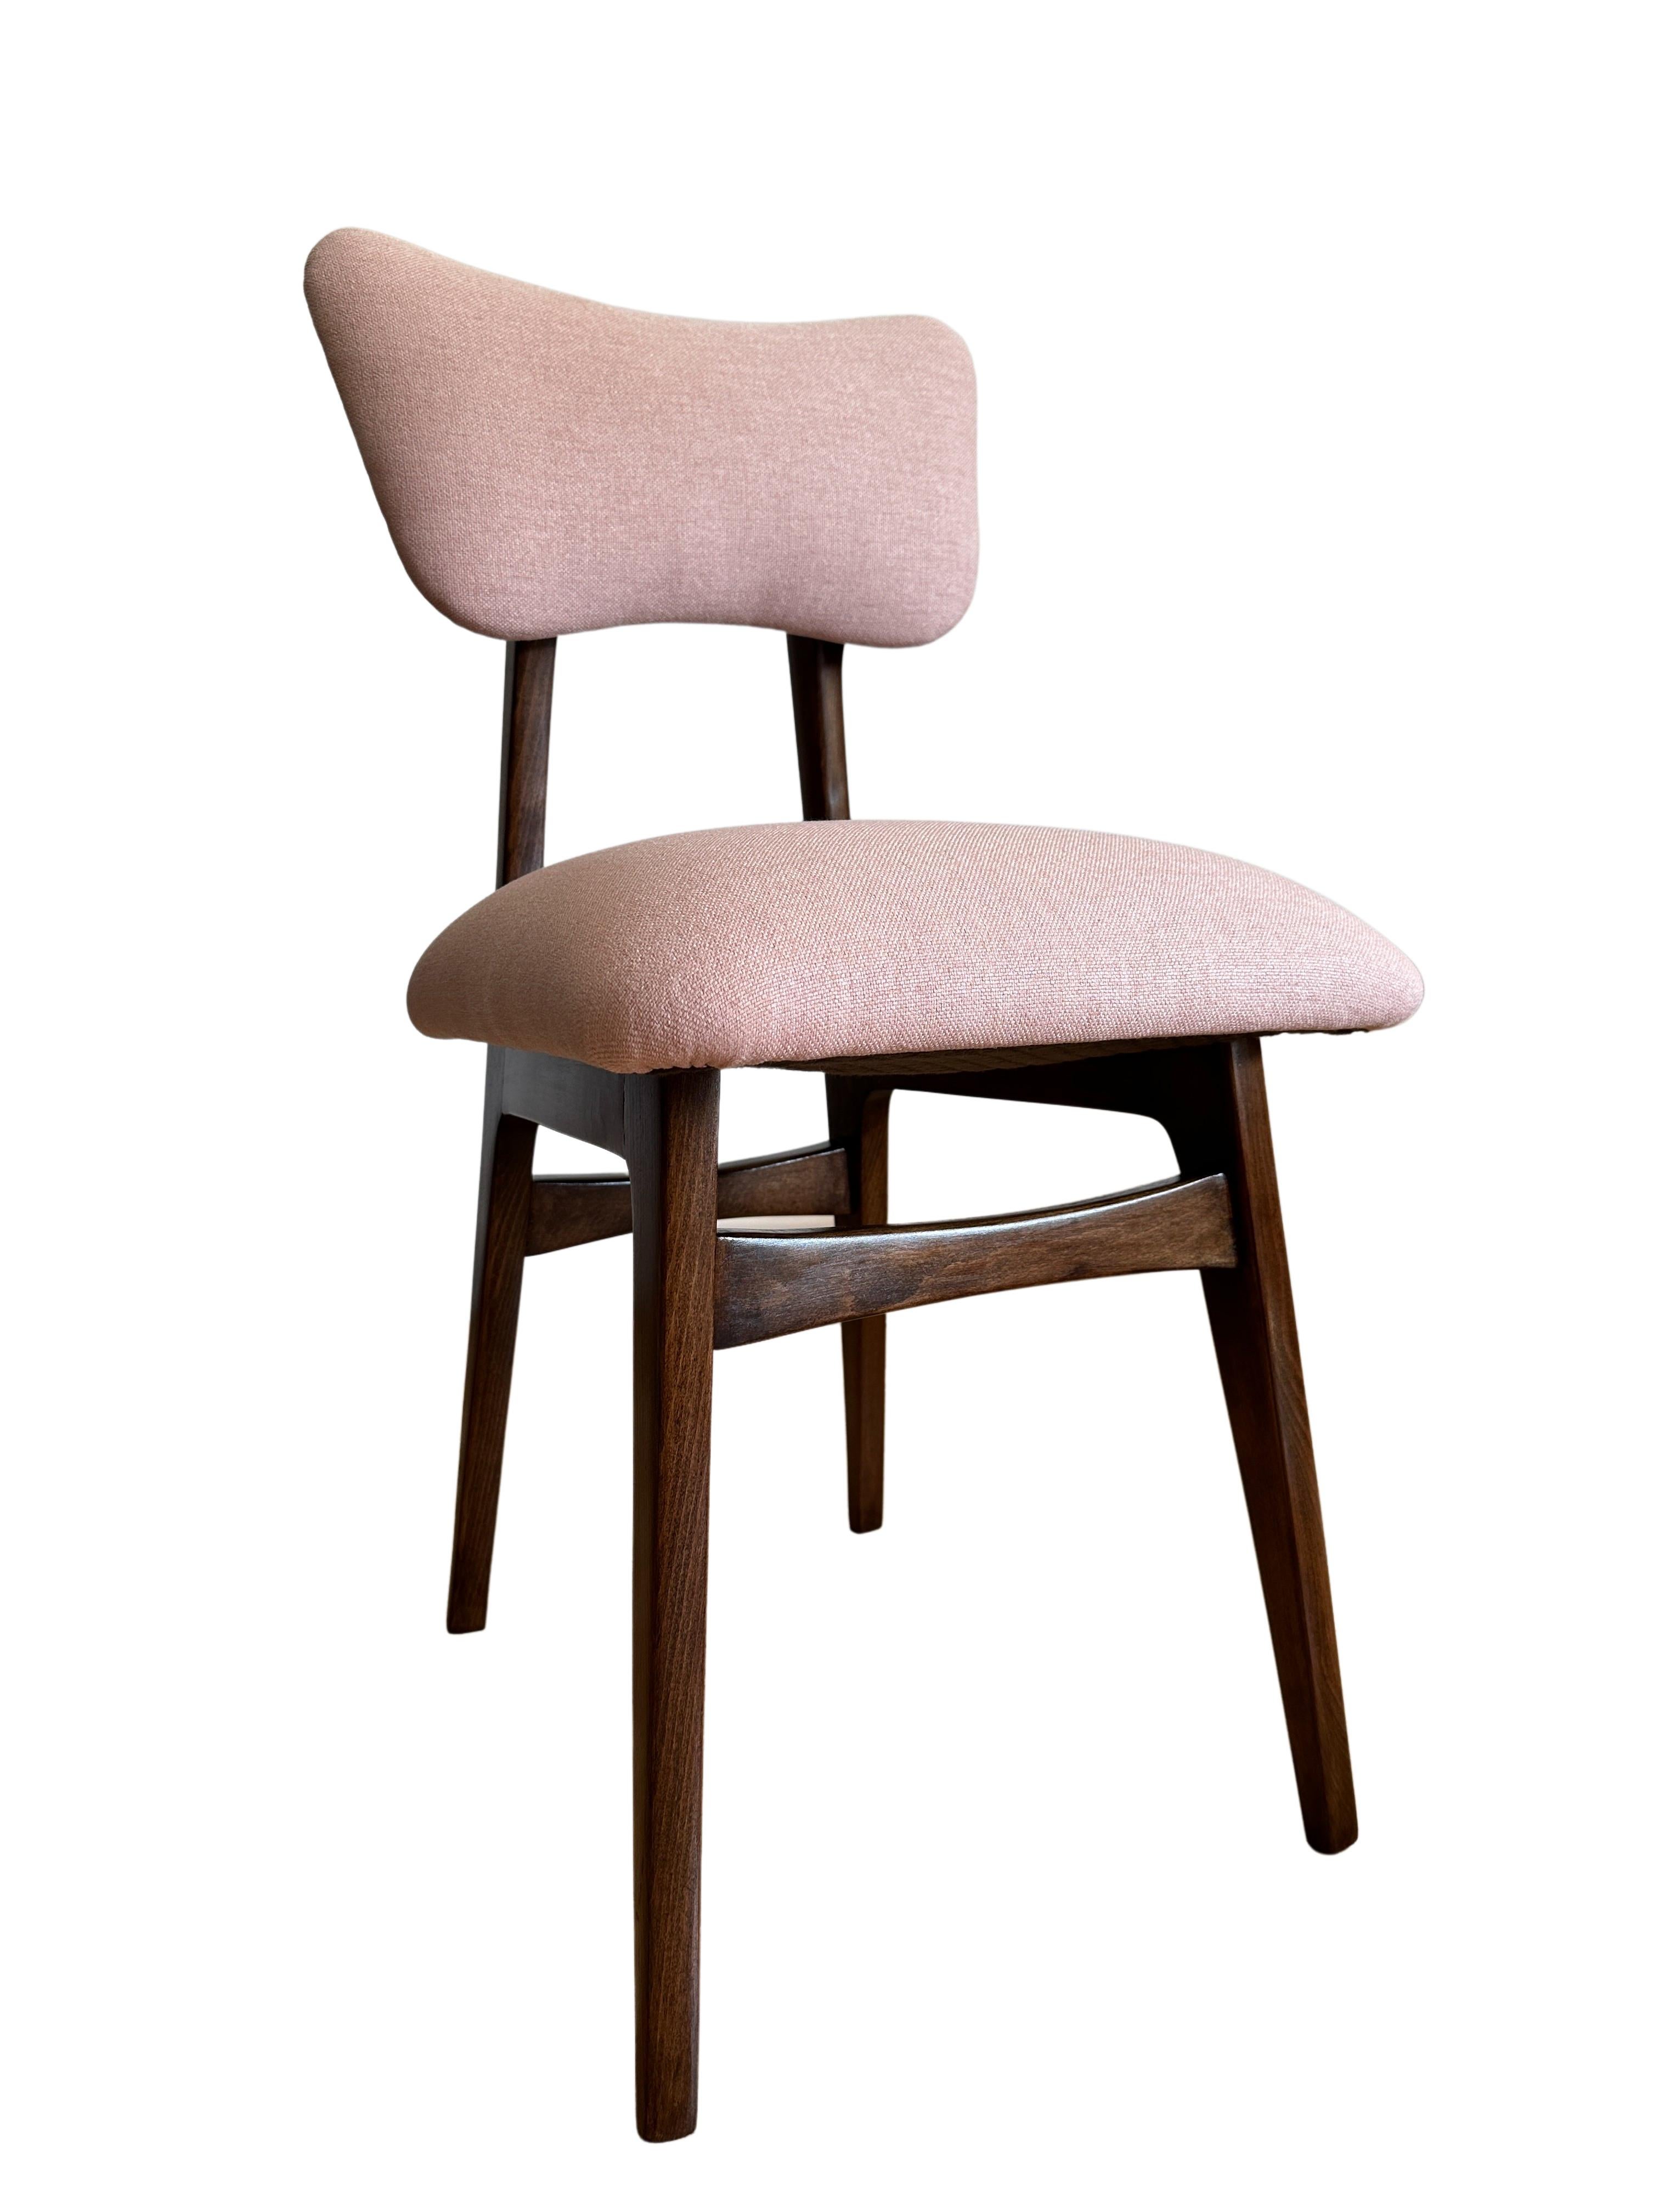 Set of 2 Midcentury Light Pink Dining Chairs, Europe, 1960s For Sale 1